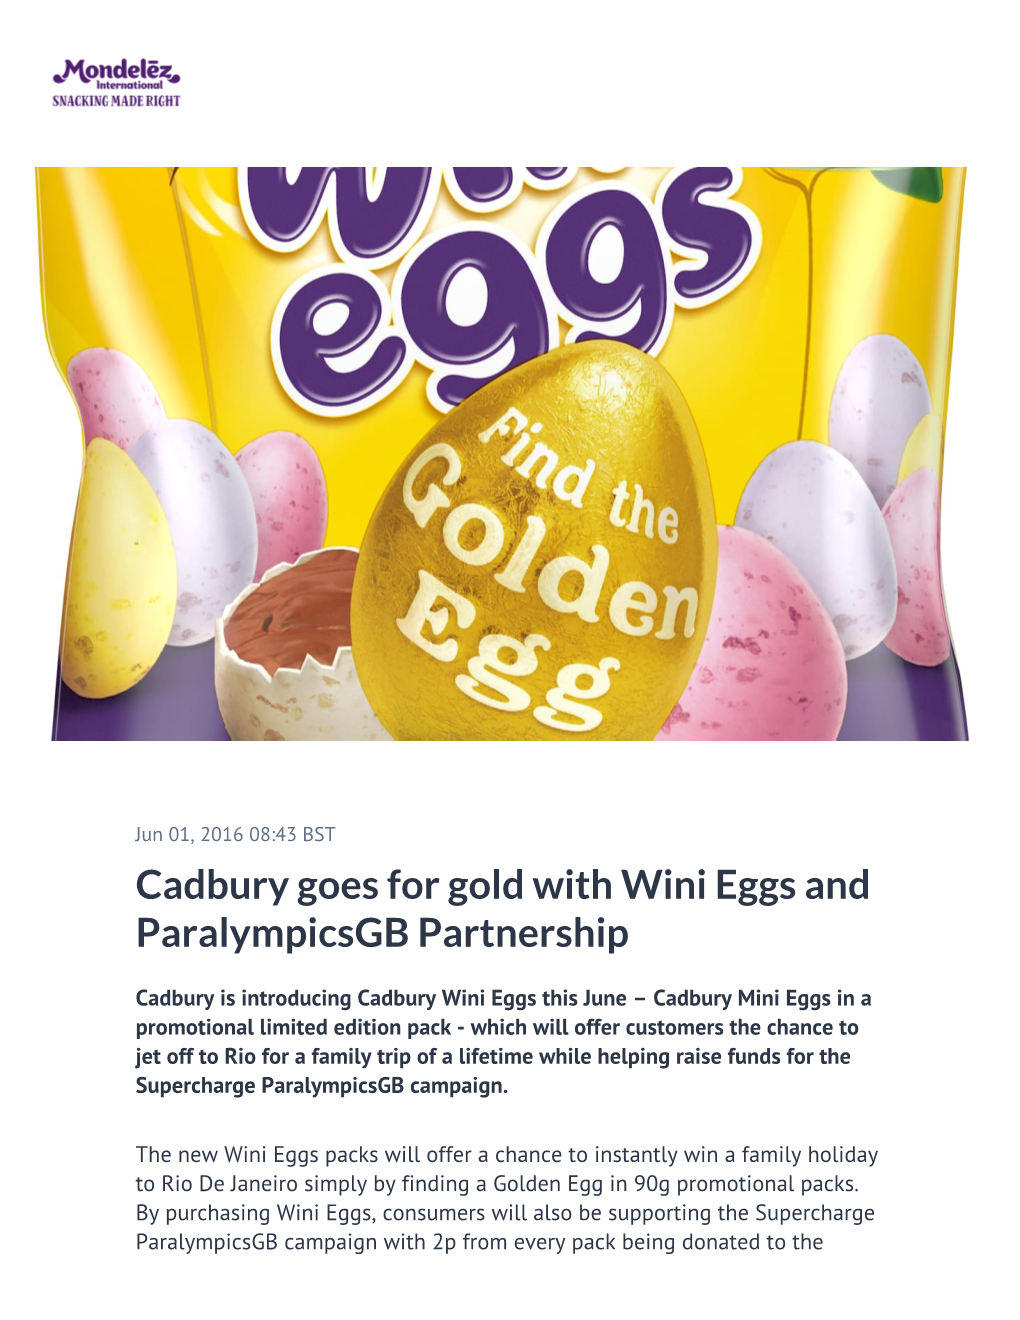 Cadbury Goes for Gold with Wini Eggs and Paralympicsgb Partnership